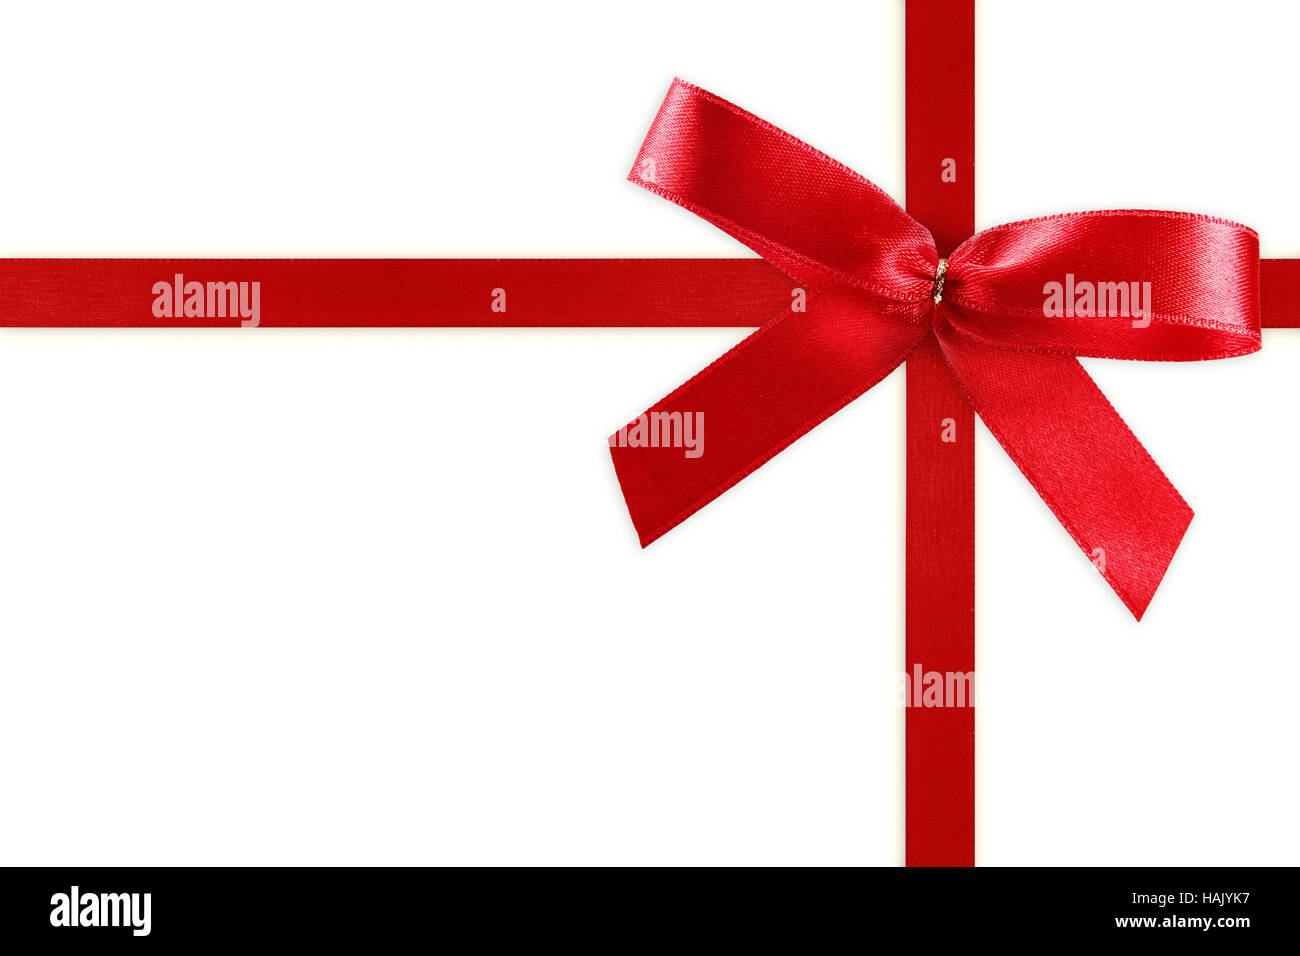 shiny red satin ribbon with bow on white background Stock Photo